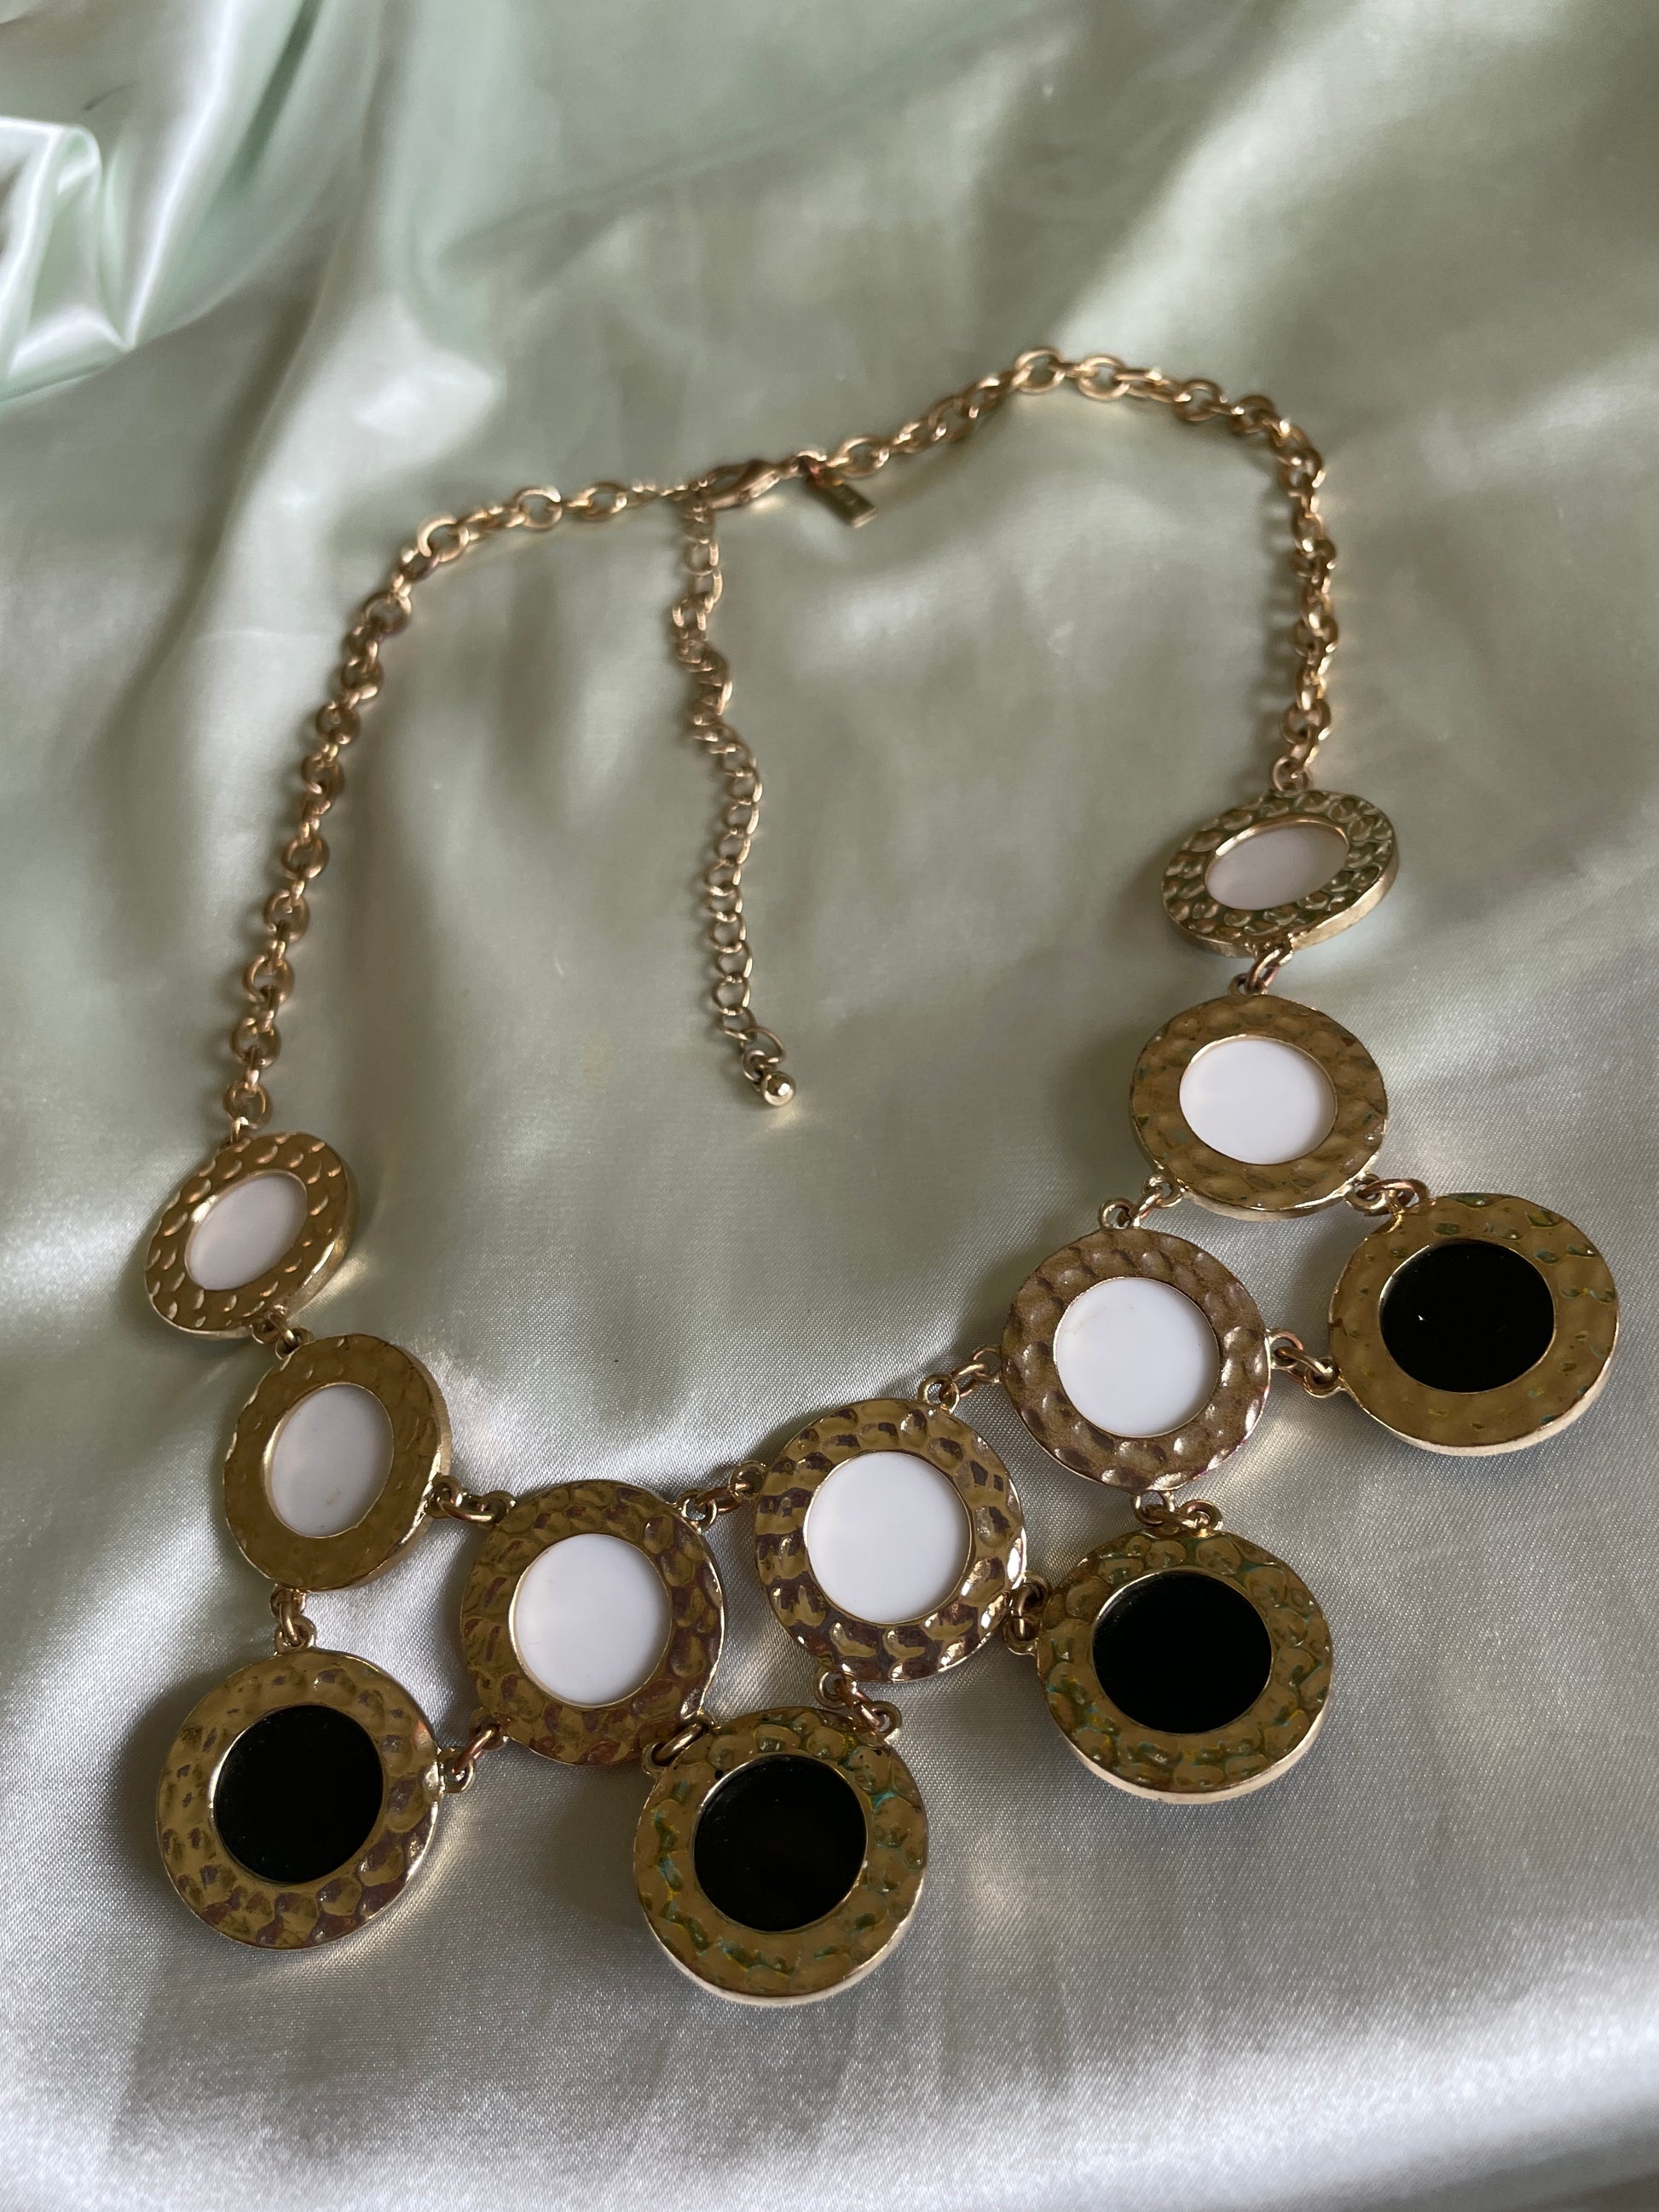  90s Signed Cookie Lee Gold Tone Black White Cabochon Bib Necklace